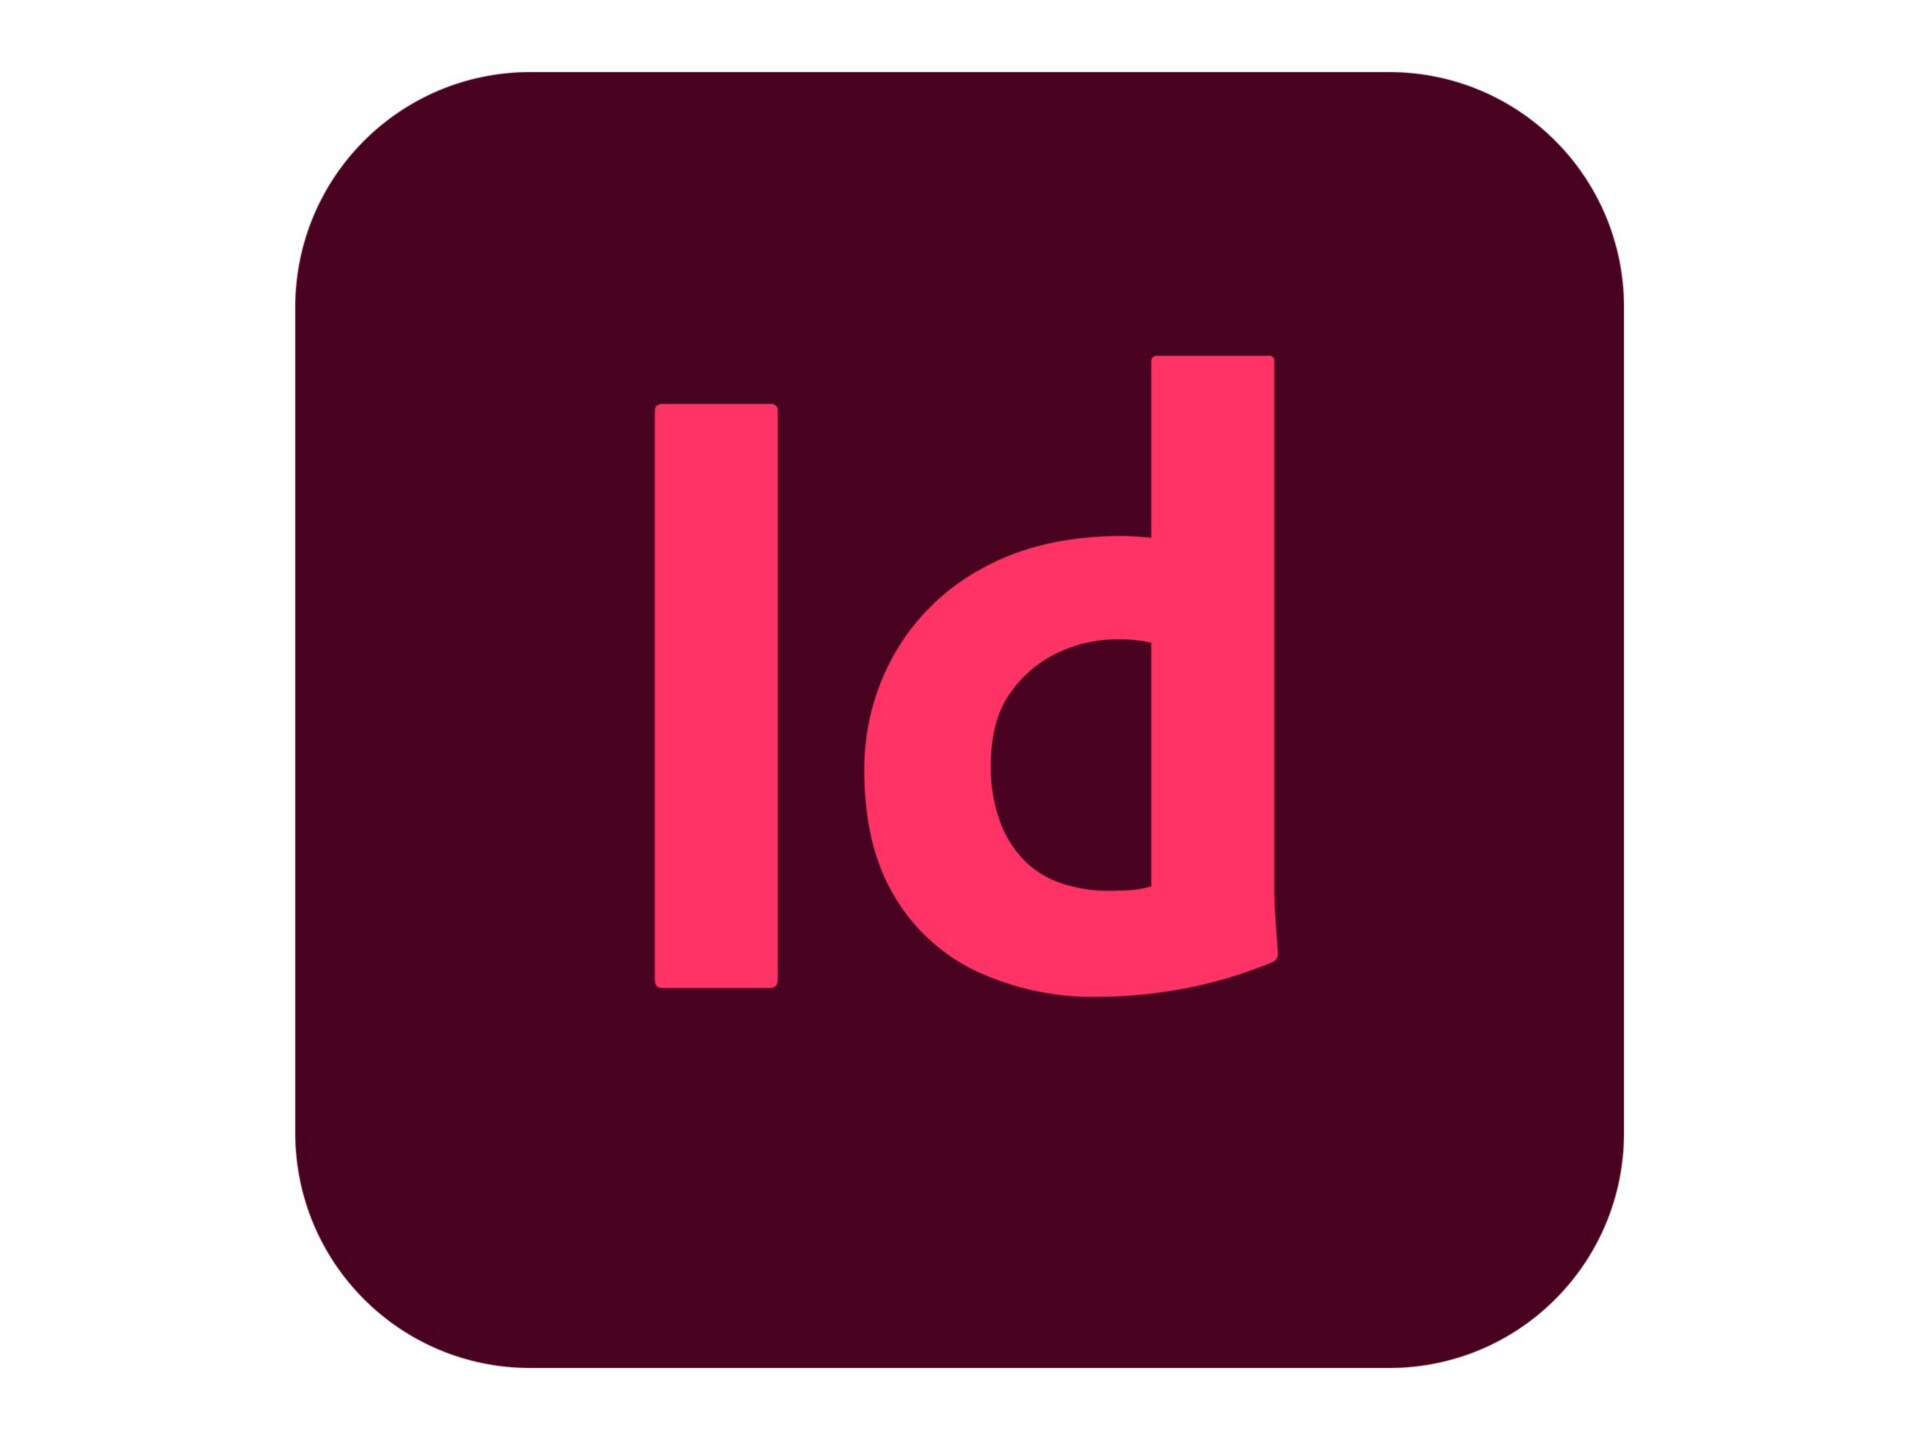 Adobe InDesign CC for teams - Subscription New (47 months) - 1 named user